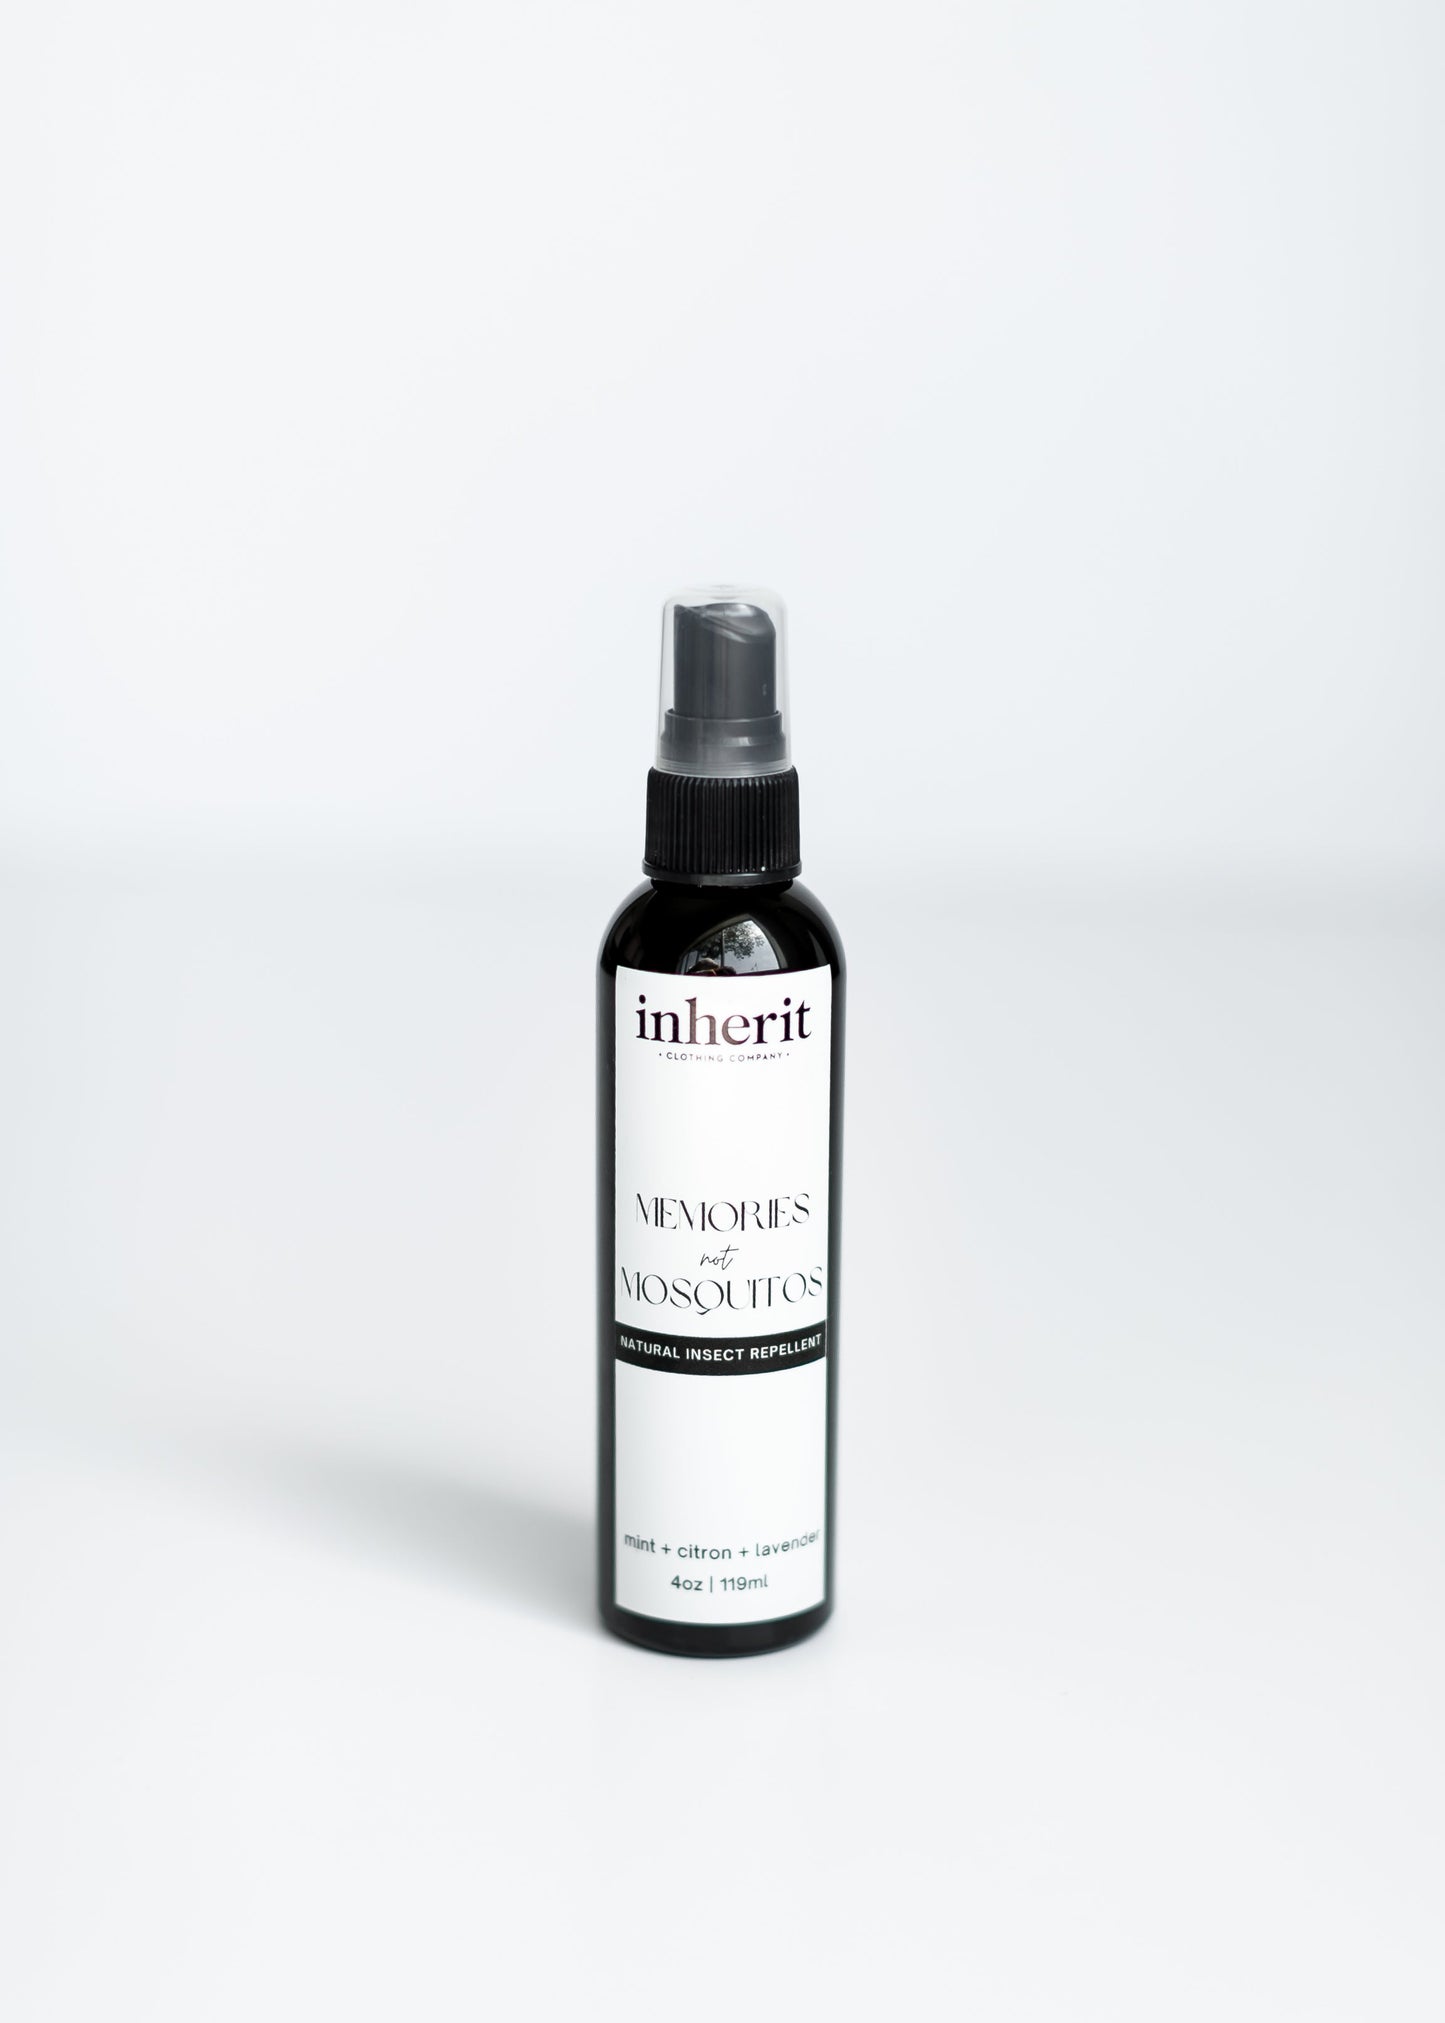 Inherit Natural Insect Repellent Gifts